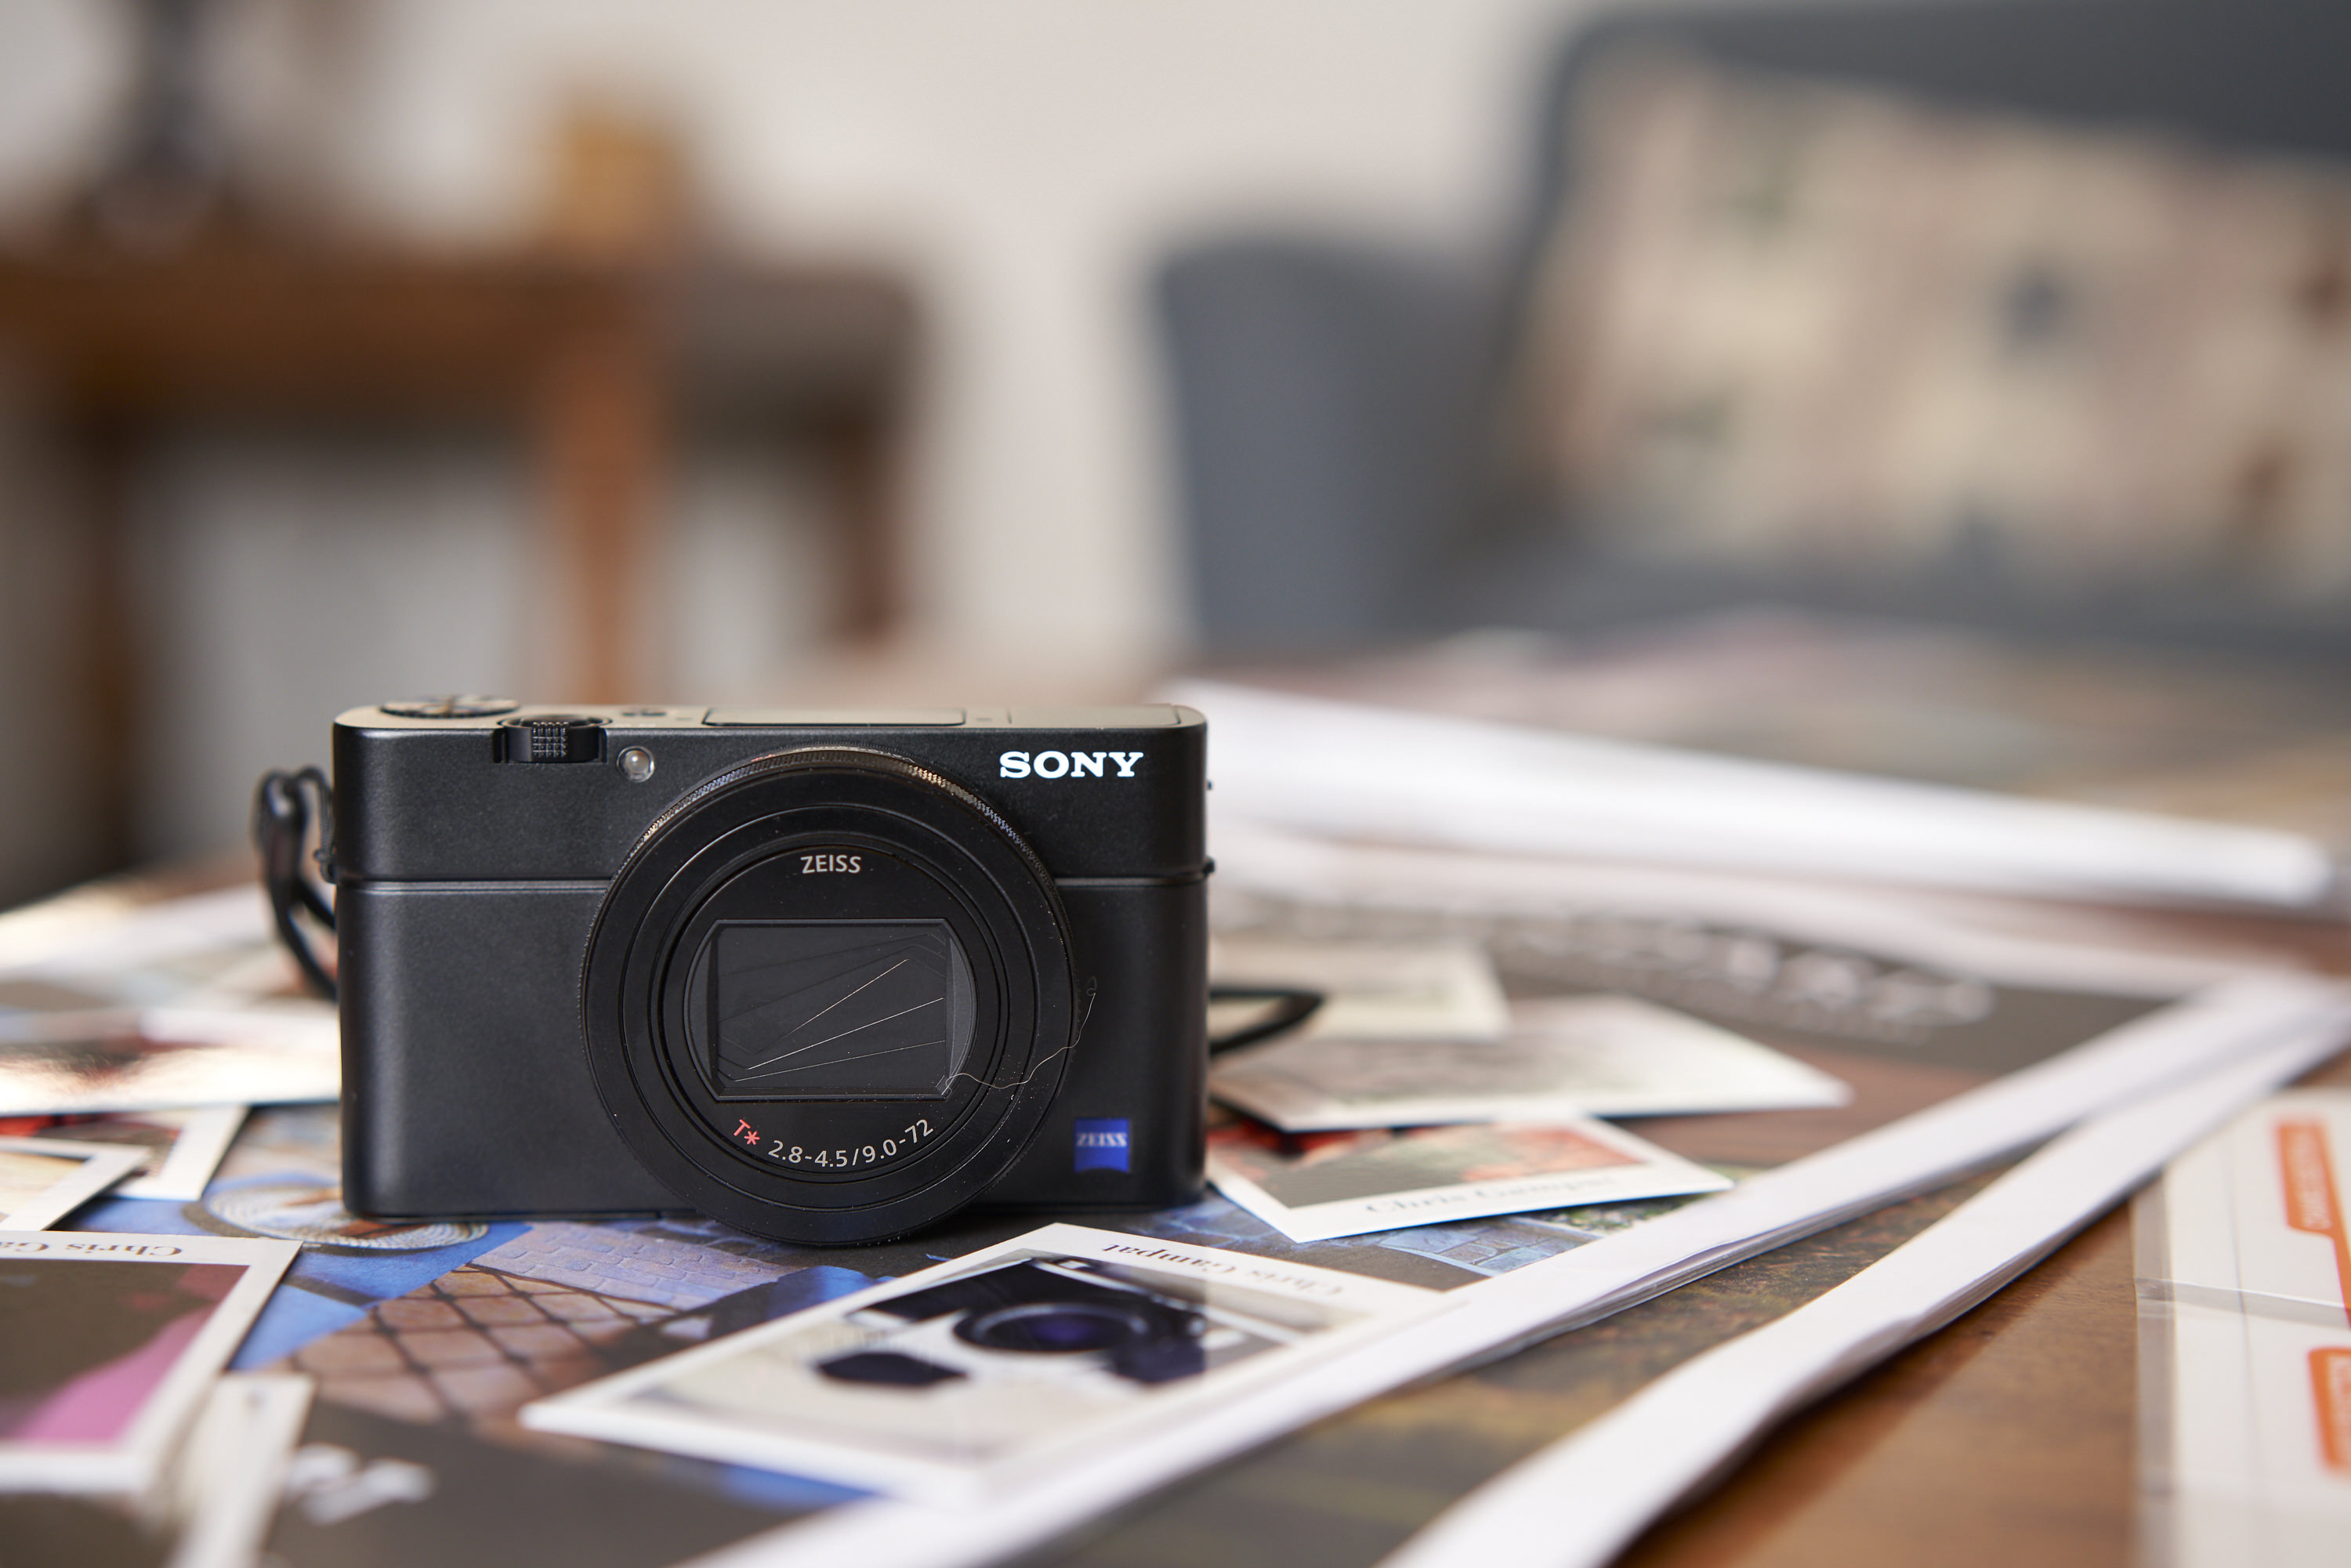 Sony RX100 VII Takes the Best Point-and-Shoot and Makes it Better